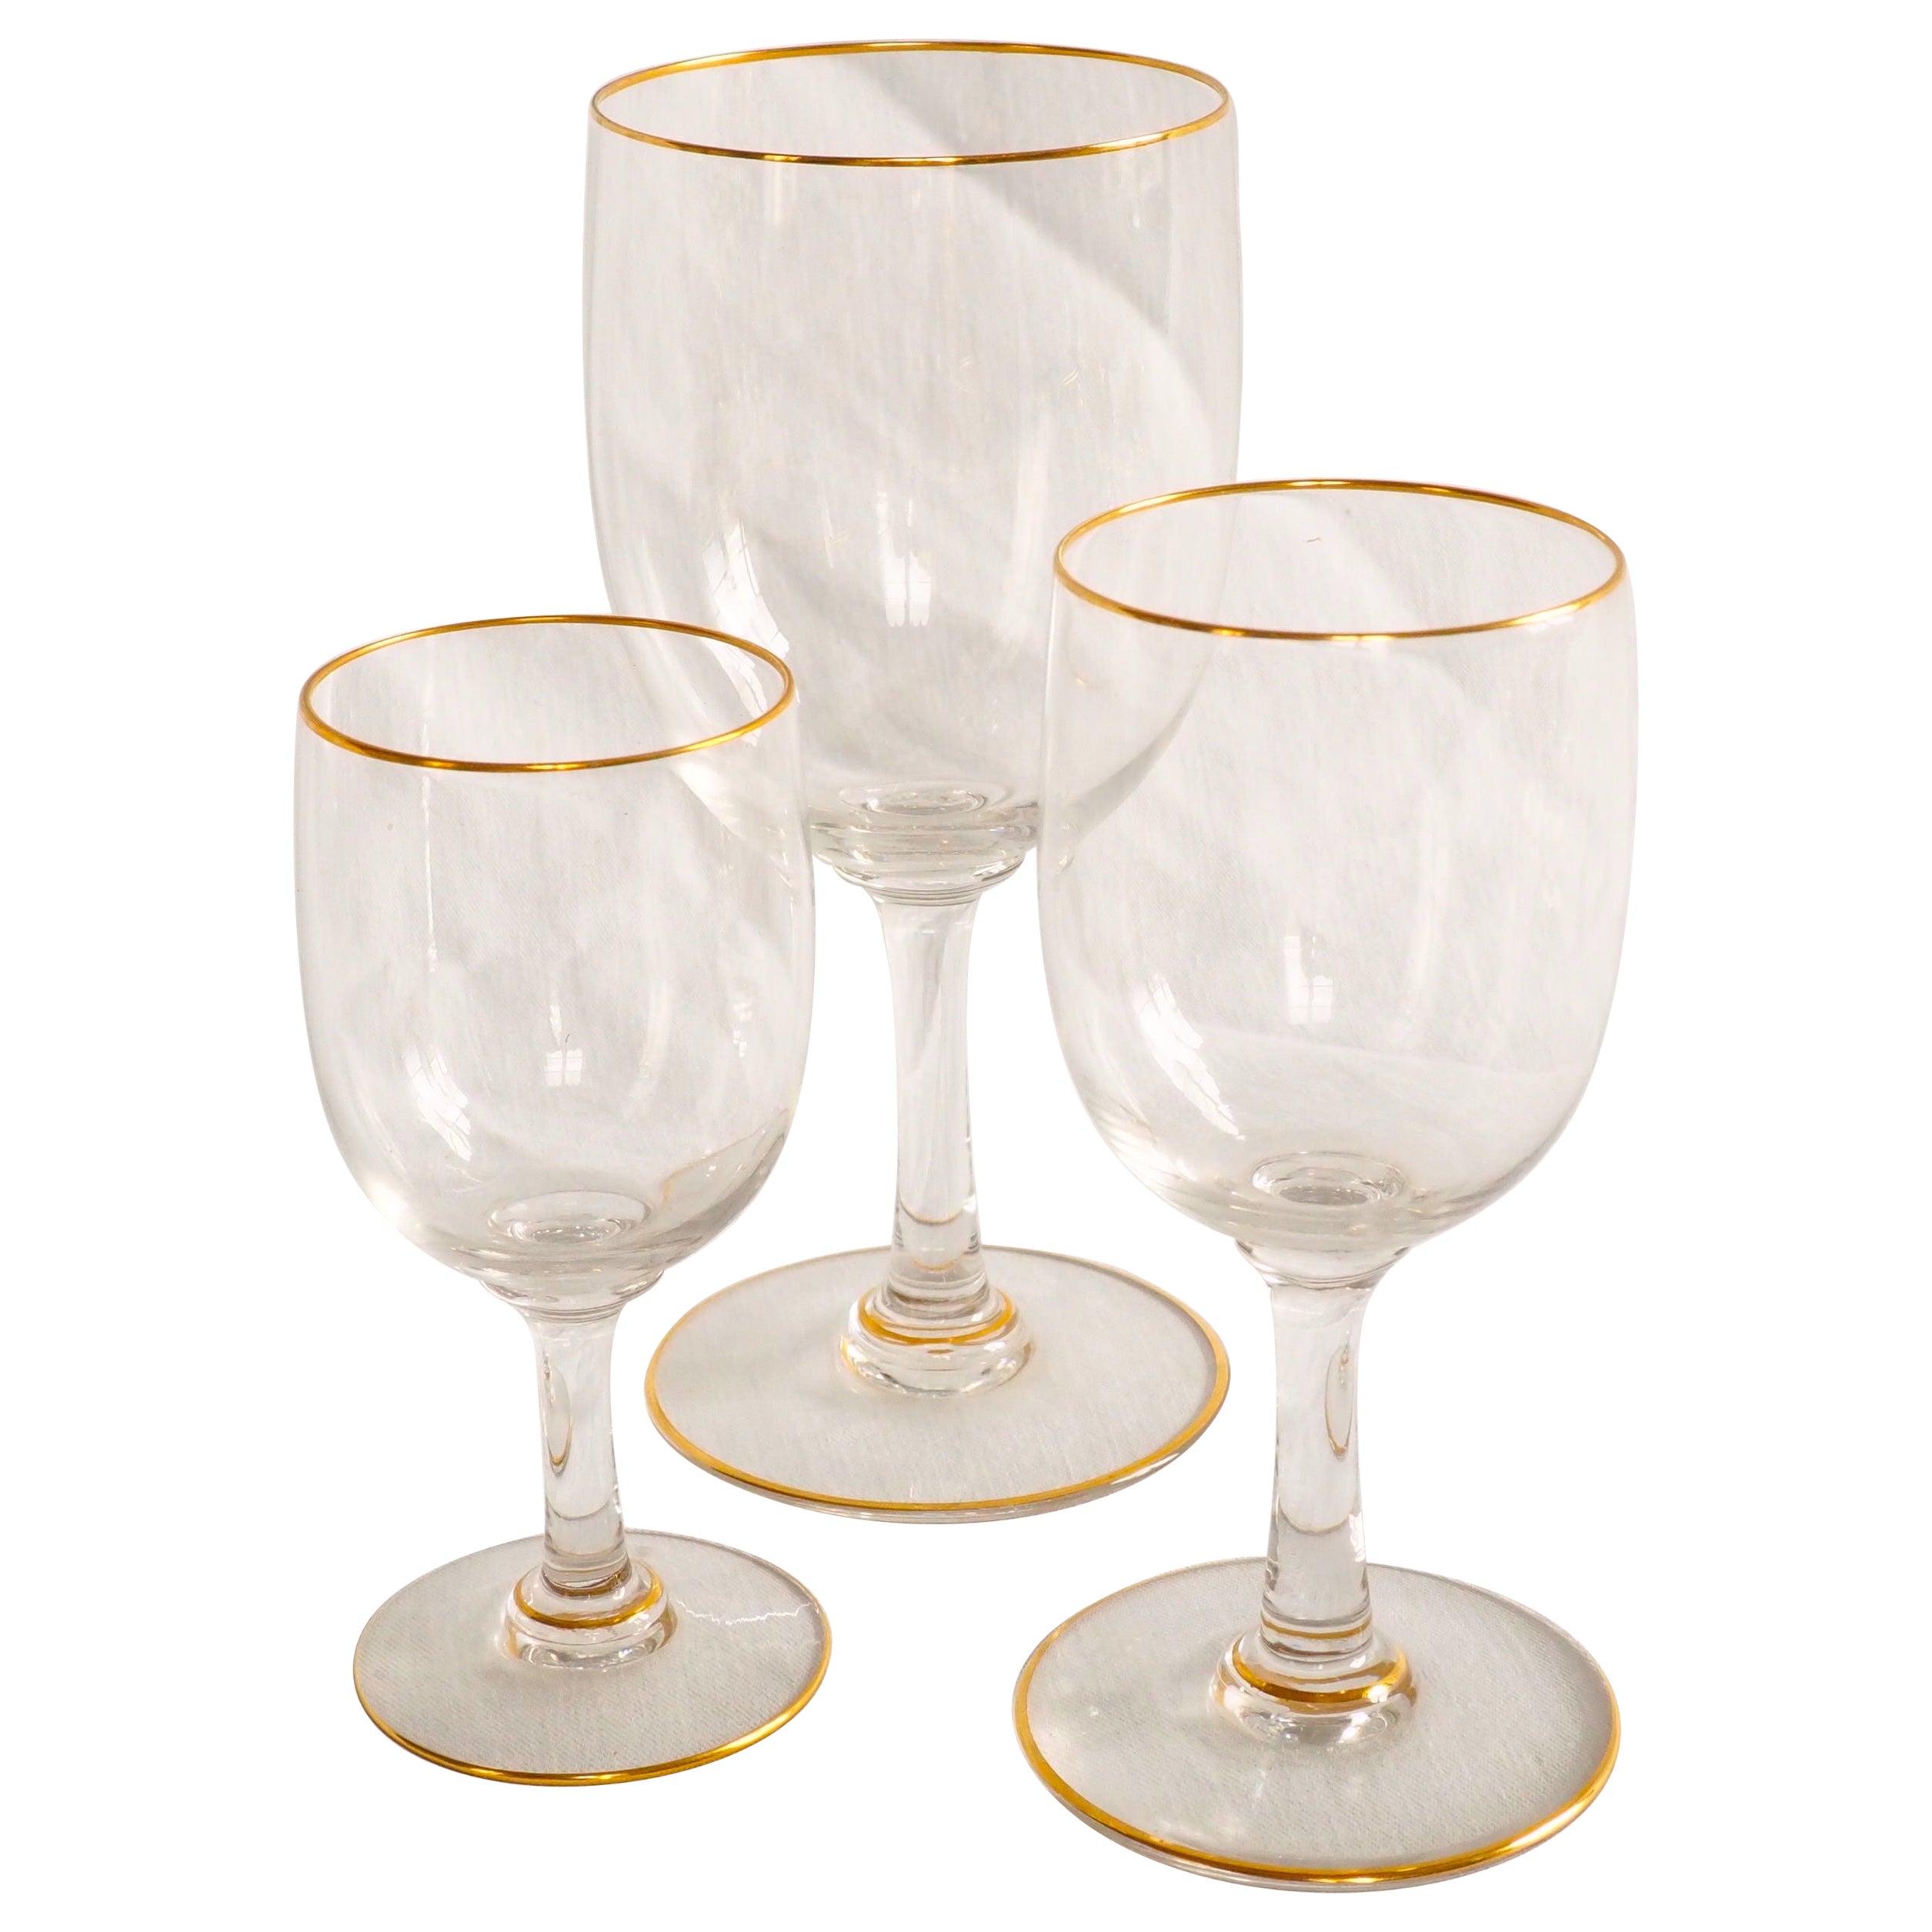 Set of 3 Baccarat crystal glasses - France - Perfection model enhanced with gold